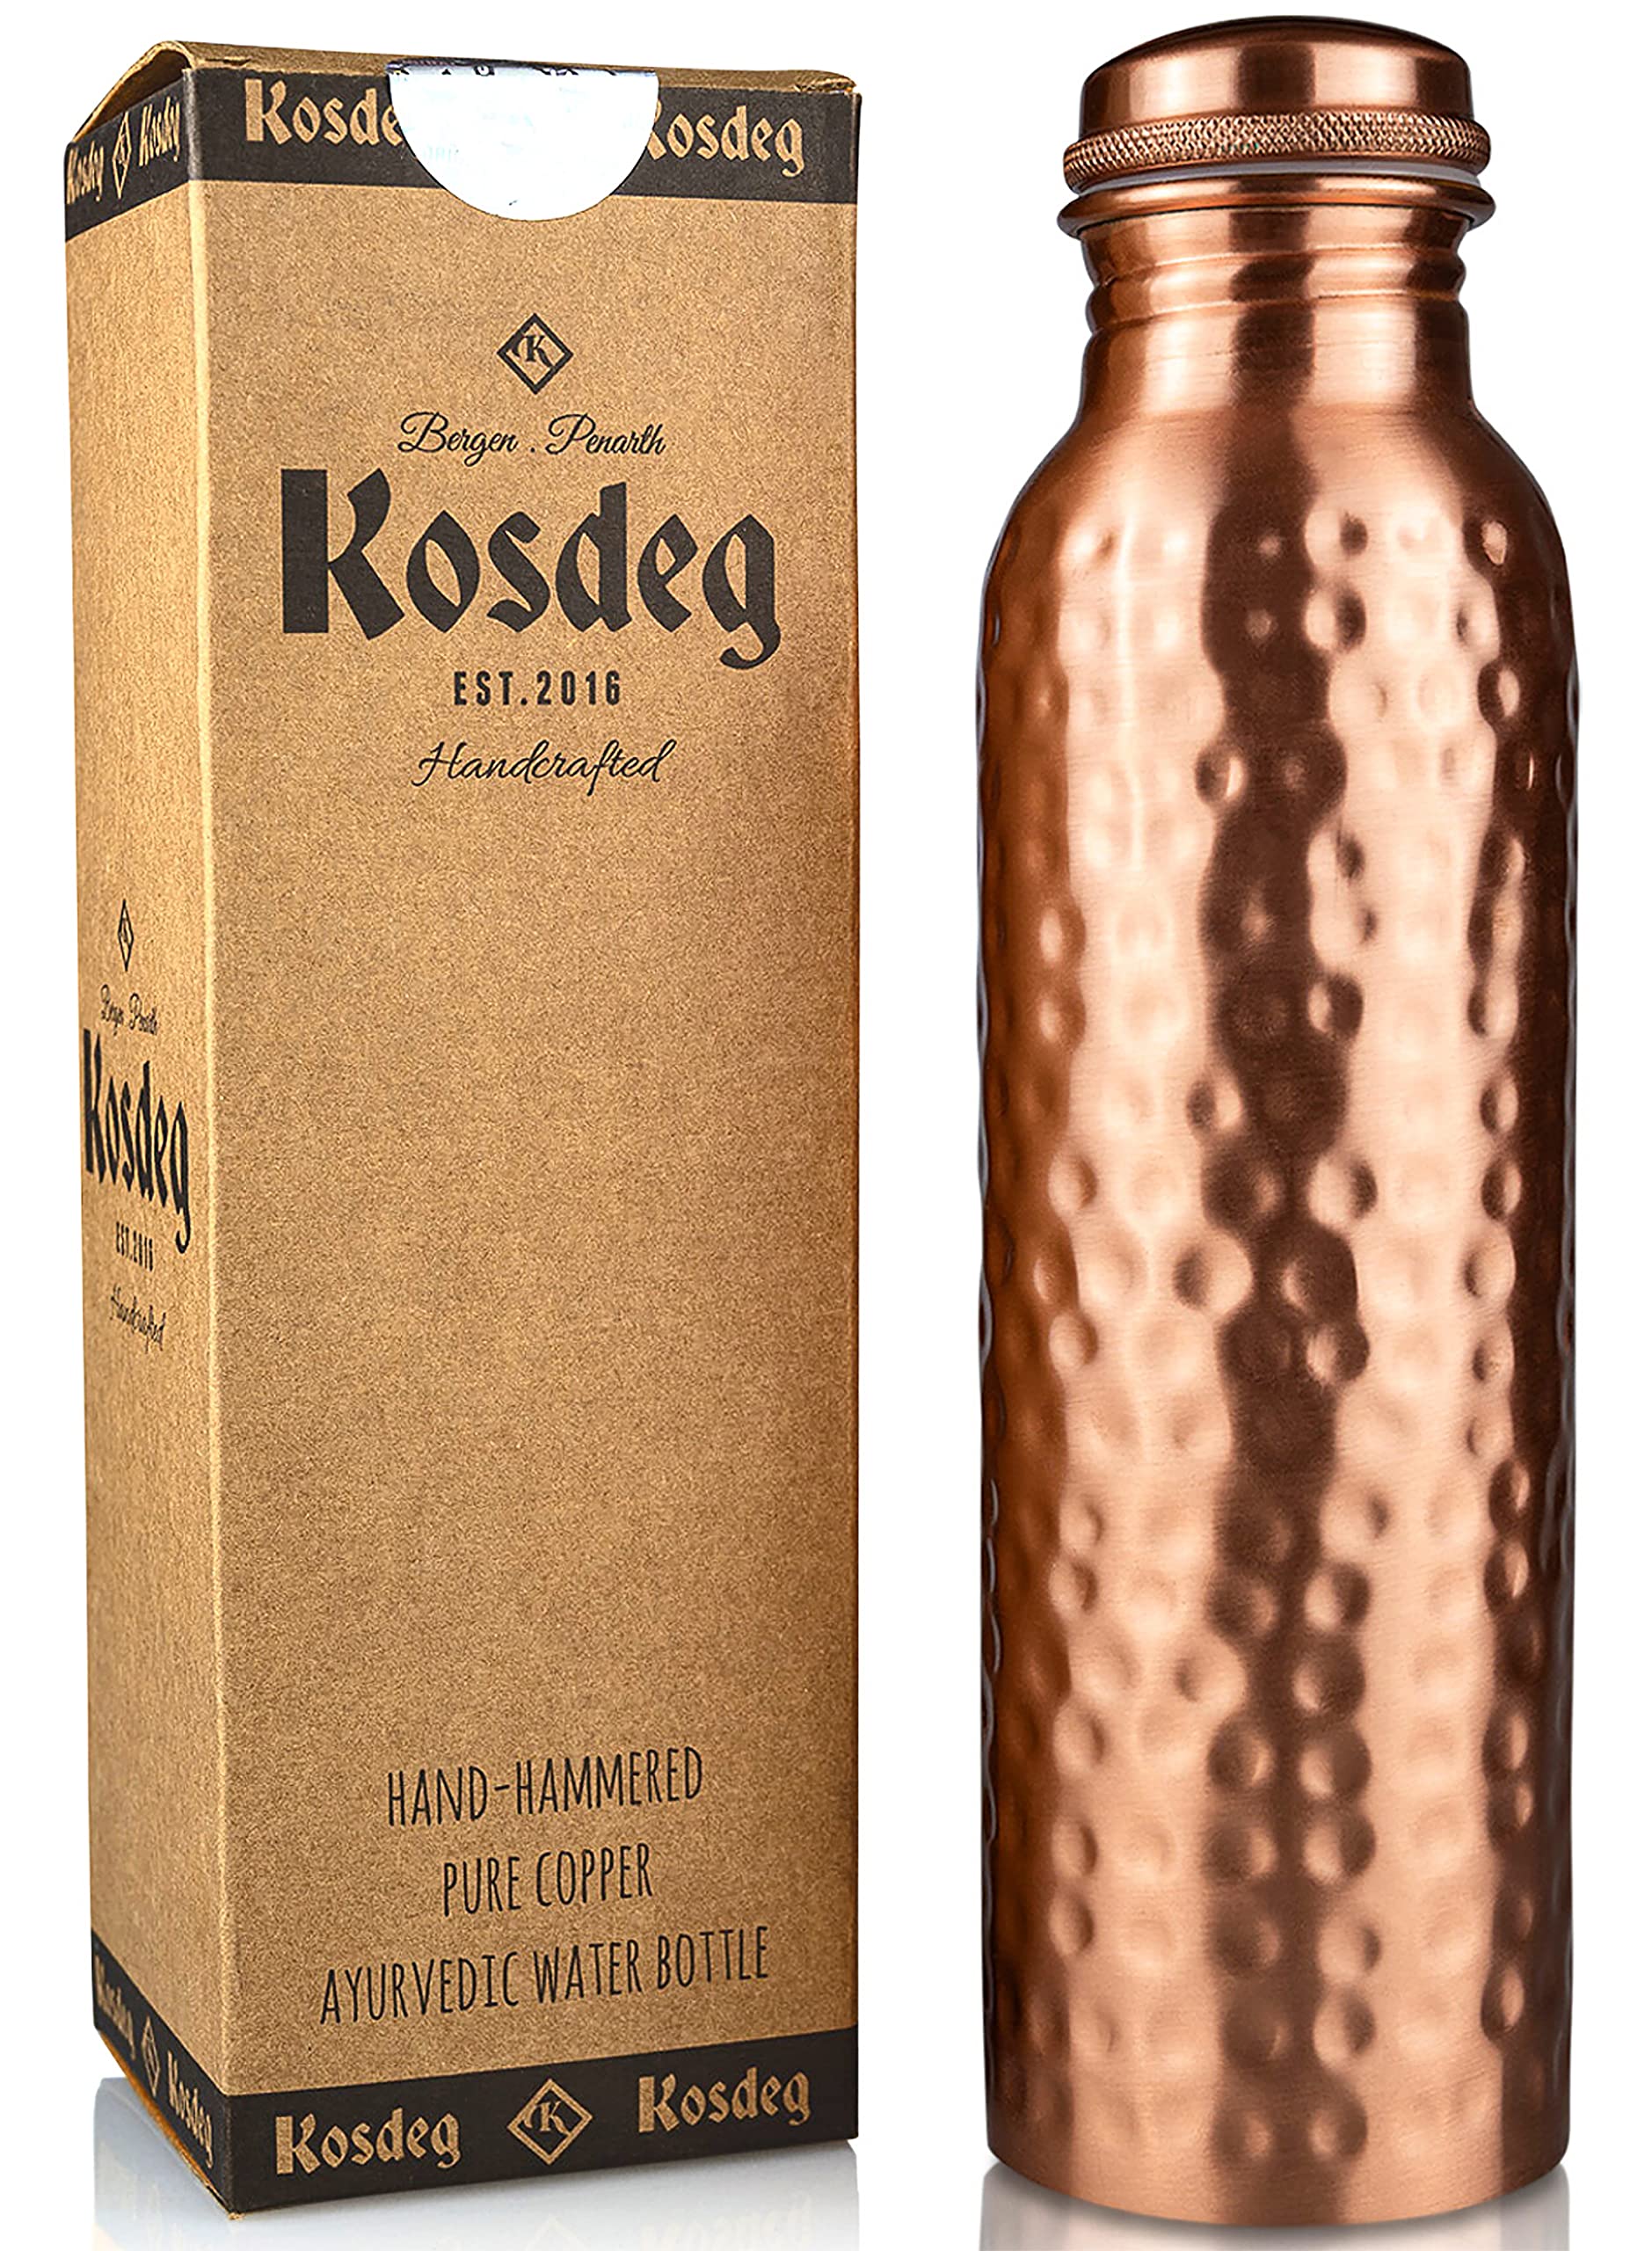 Kosdeg Hammered Copper Water Bottle 1 Liter / 34 Oz Extra Large - An Ayurvedic Pure Copper Vessel - Drink More Water, Lower Your Sugar Intake And Enjoy The Health Benefits Immediately